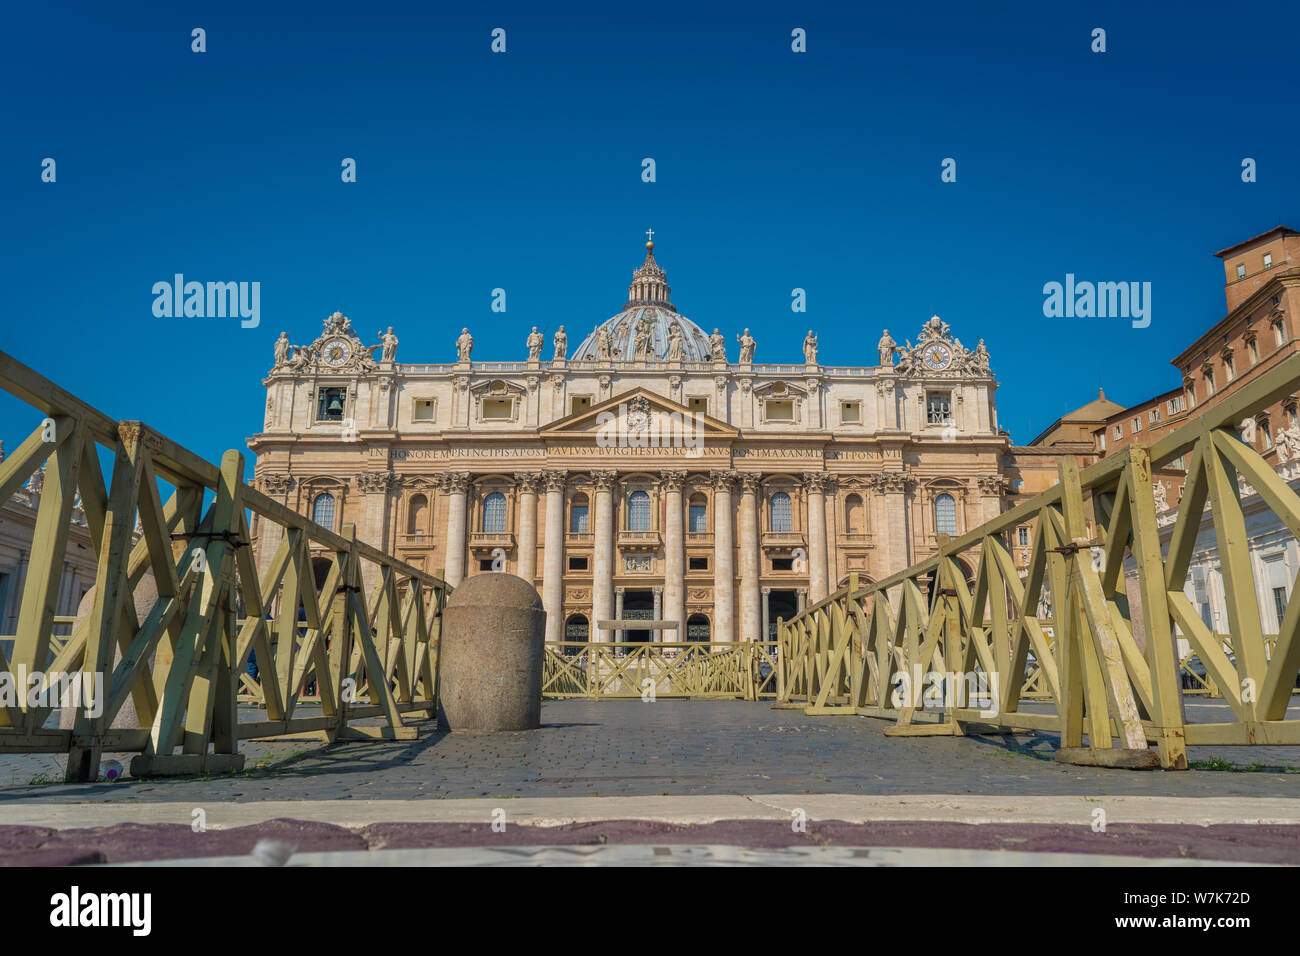 The Papal Basilica of St. Peter in the Vaticanv Stock Photo